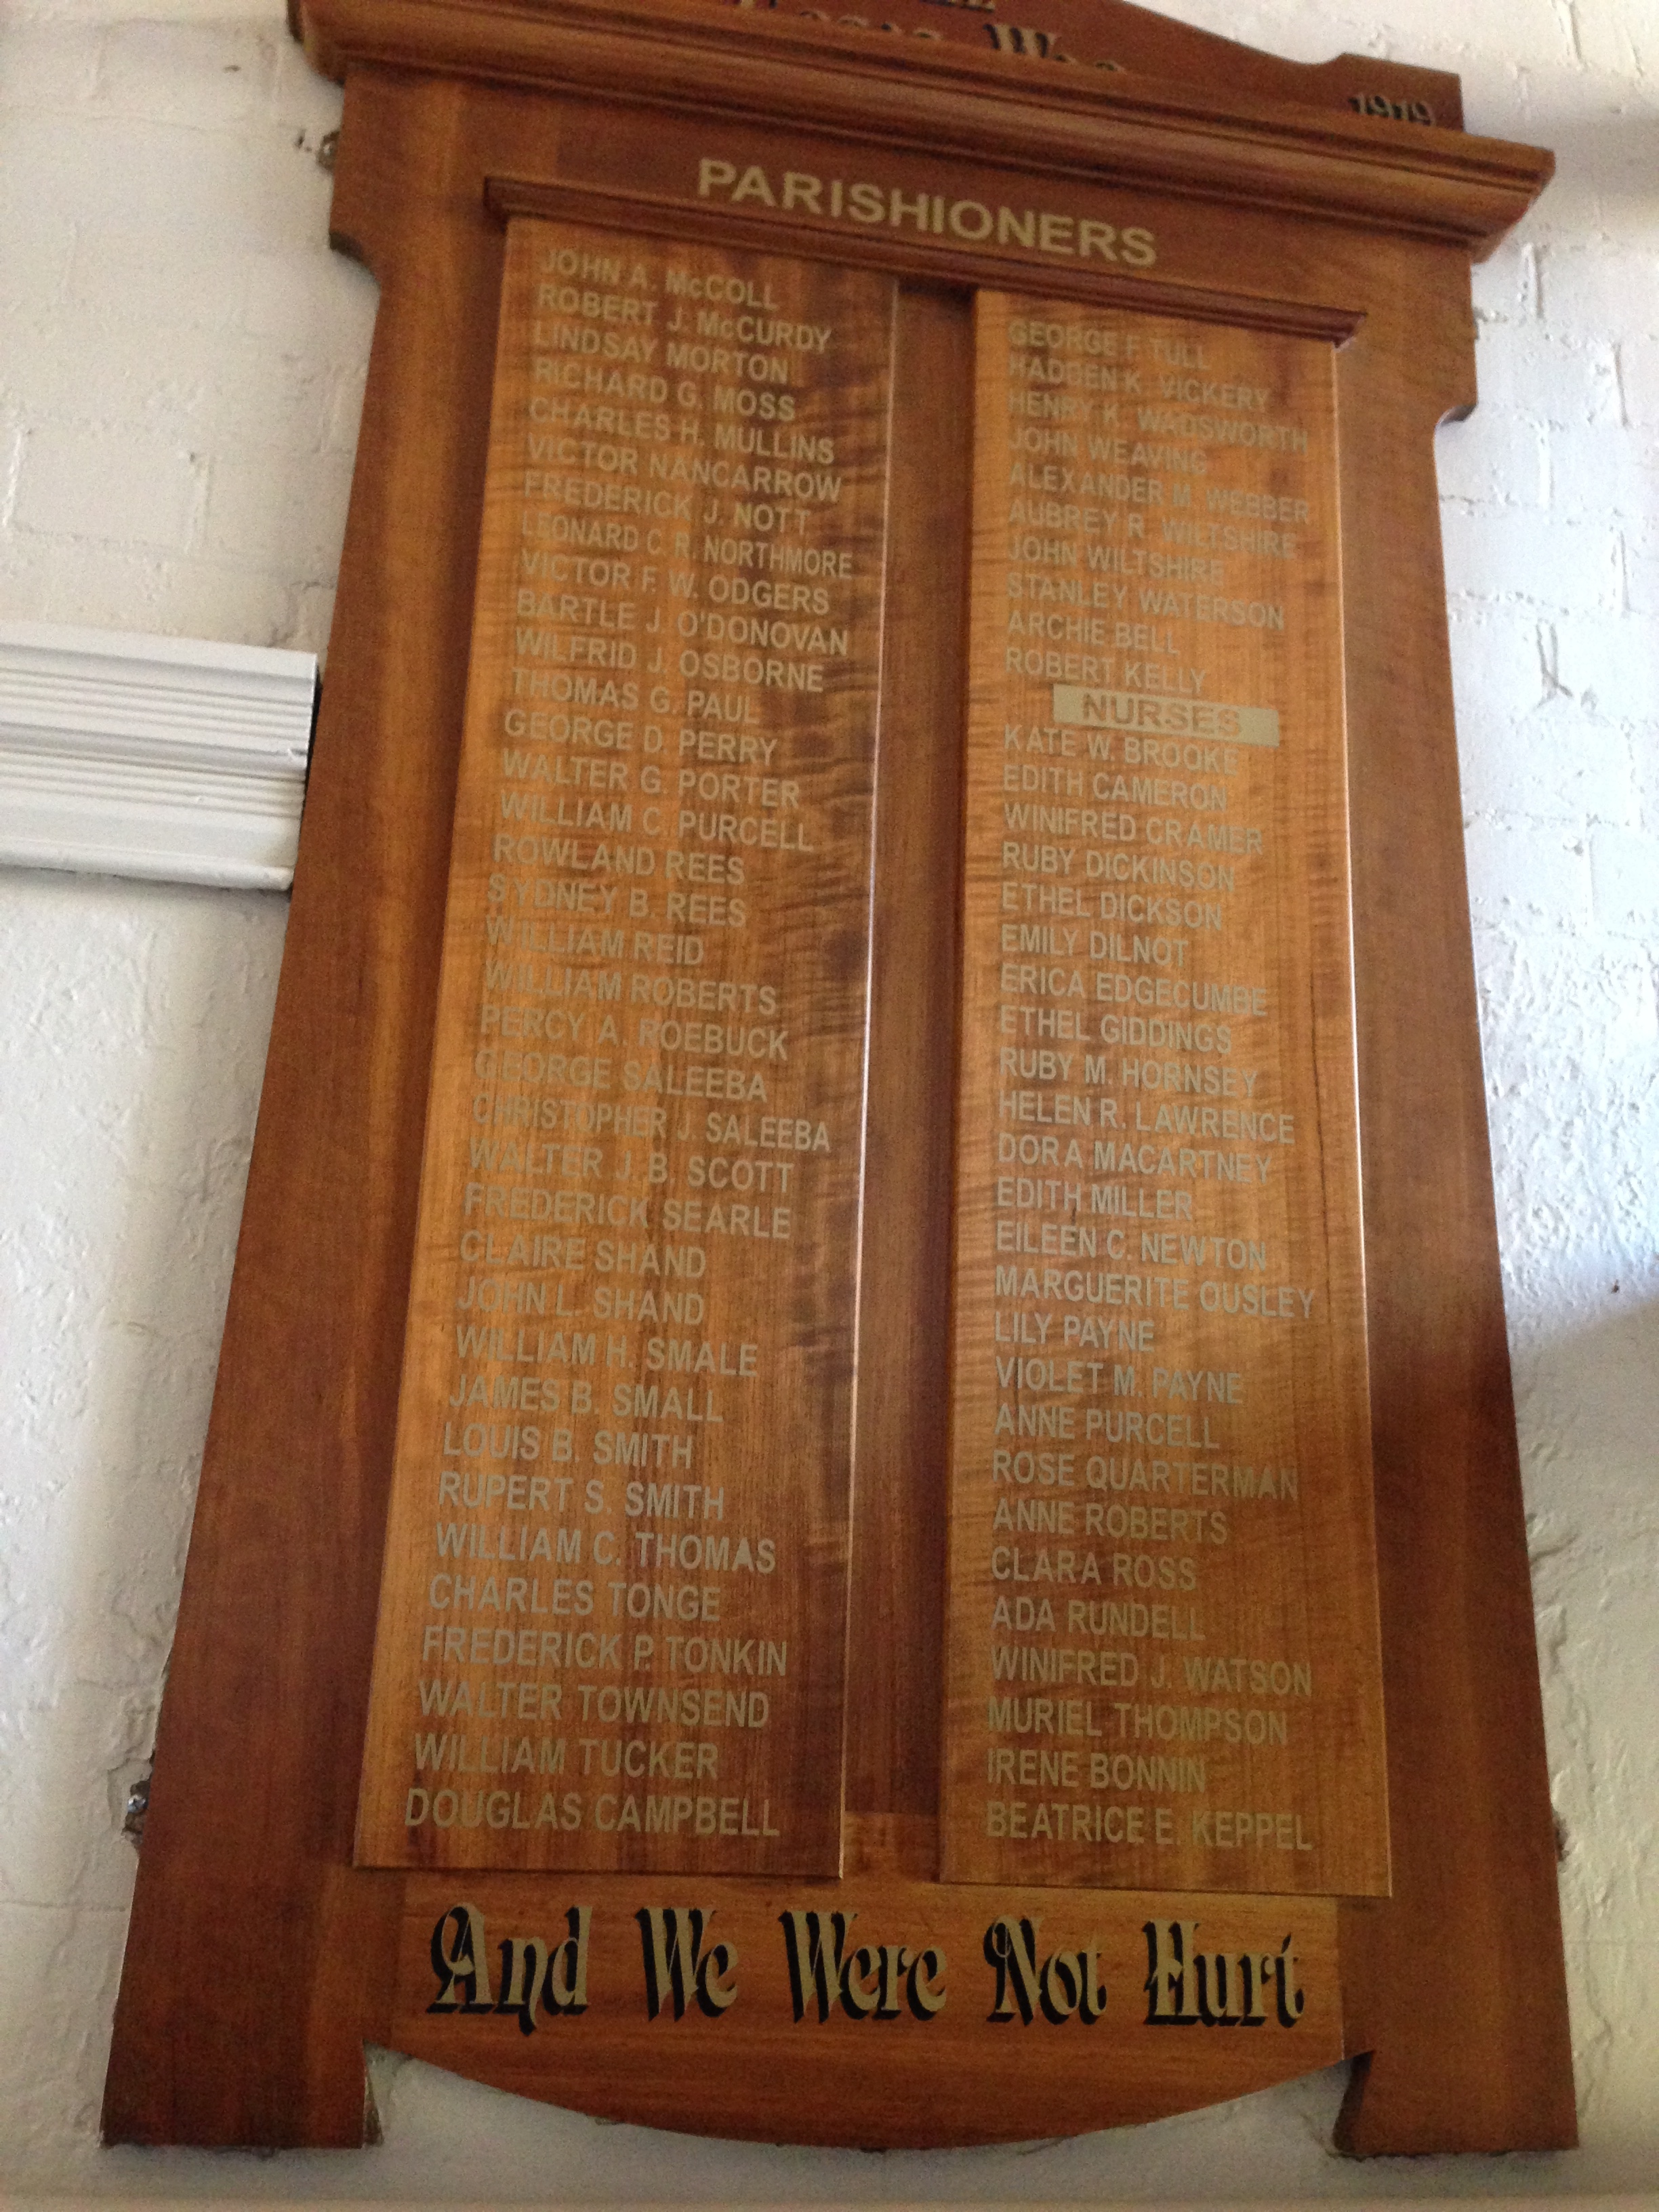 Rosa Quarterman commemorated at St Peter's Church Eastern Hill, Melbourne